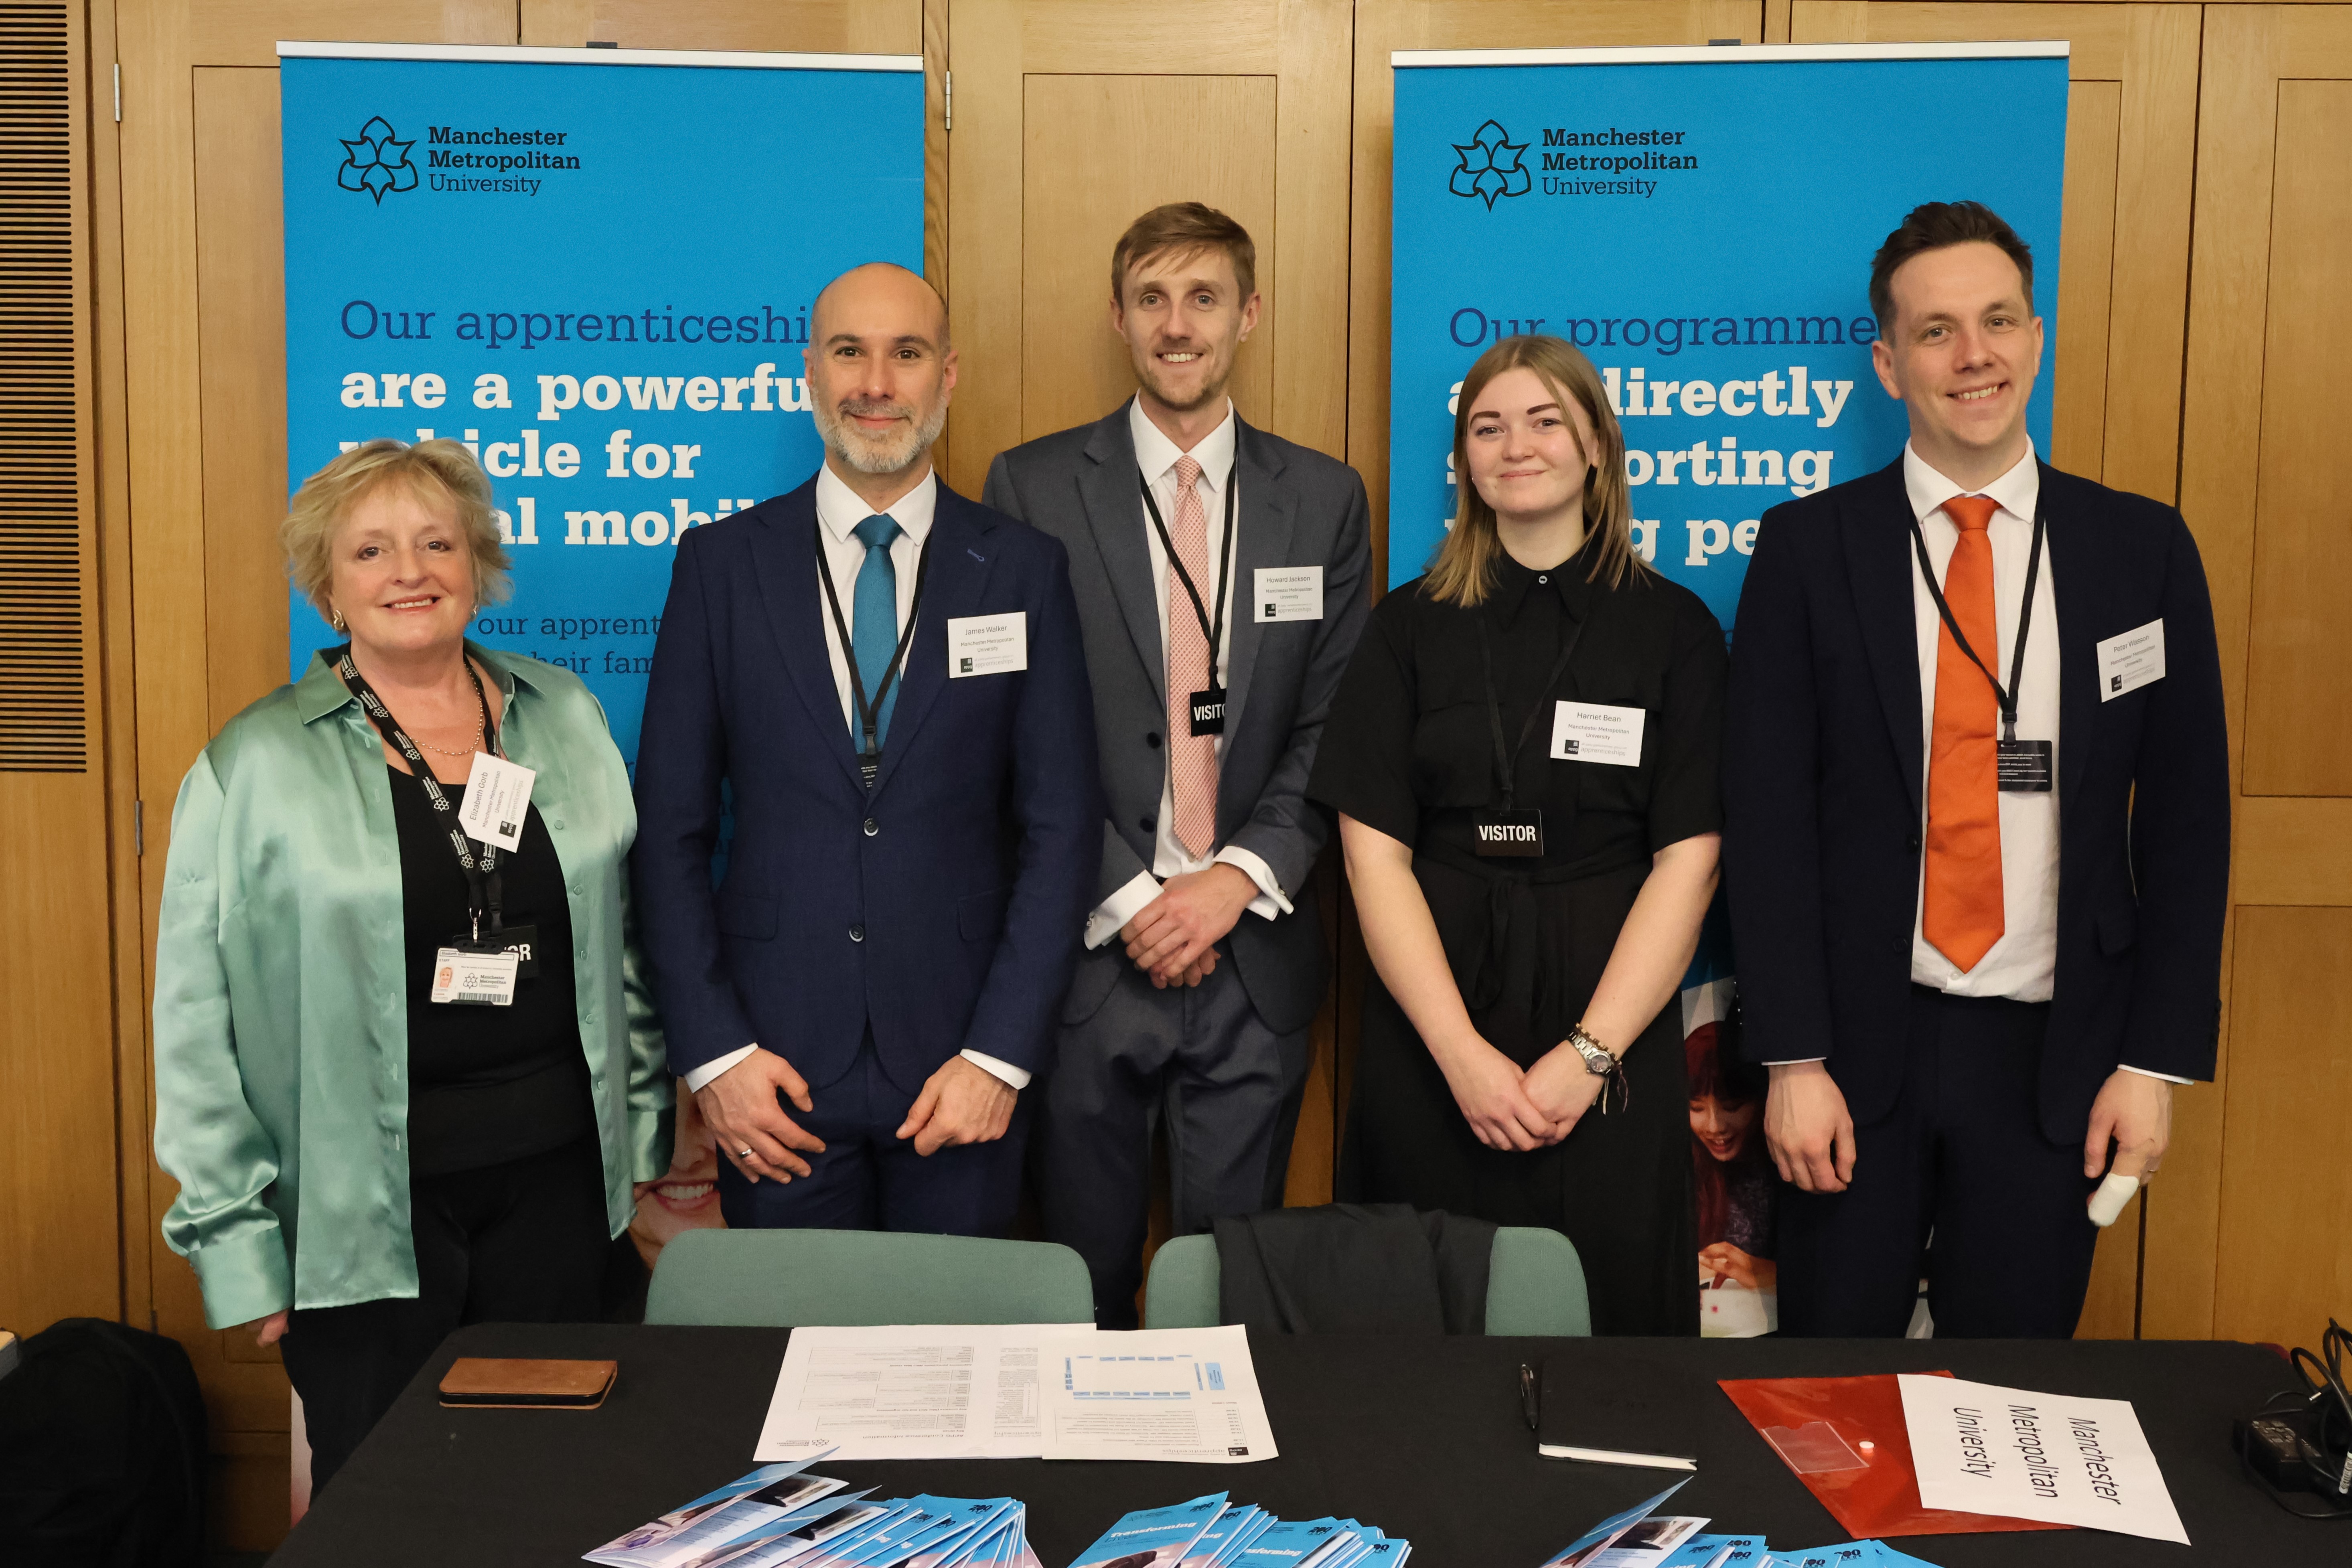 A group of Manchester Met Staff and Apprentices at the All-Party Parliamentary Group Apprenticeships Fair held at the House of Commons. Stood around a table with Manchester Met banners and marketing collateral